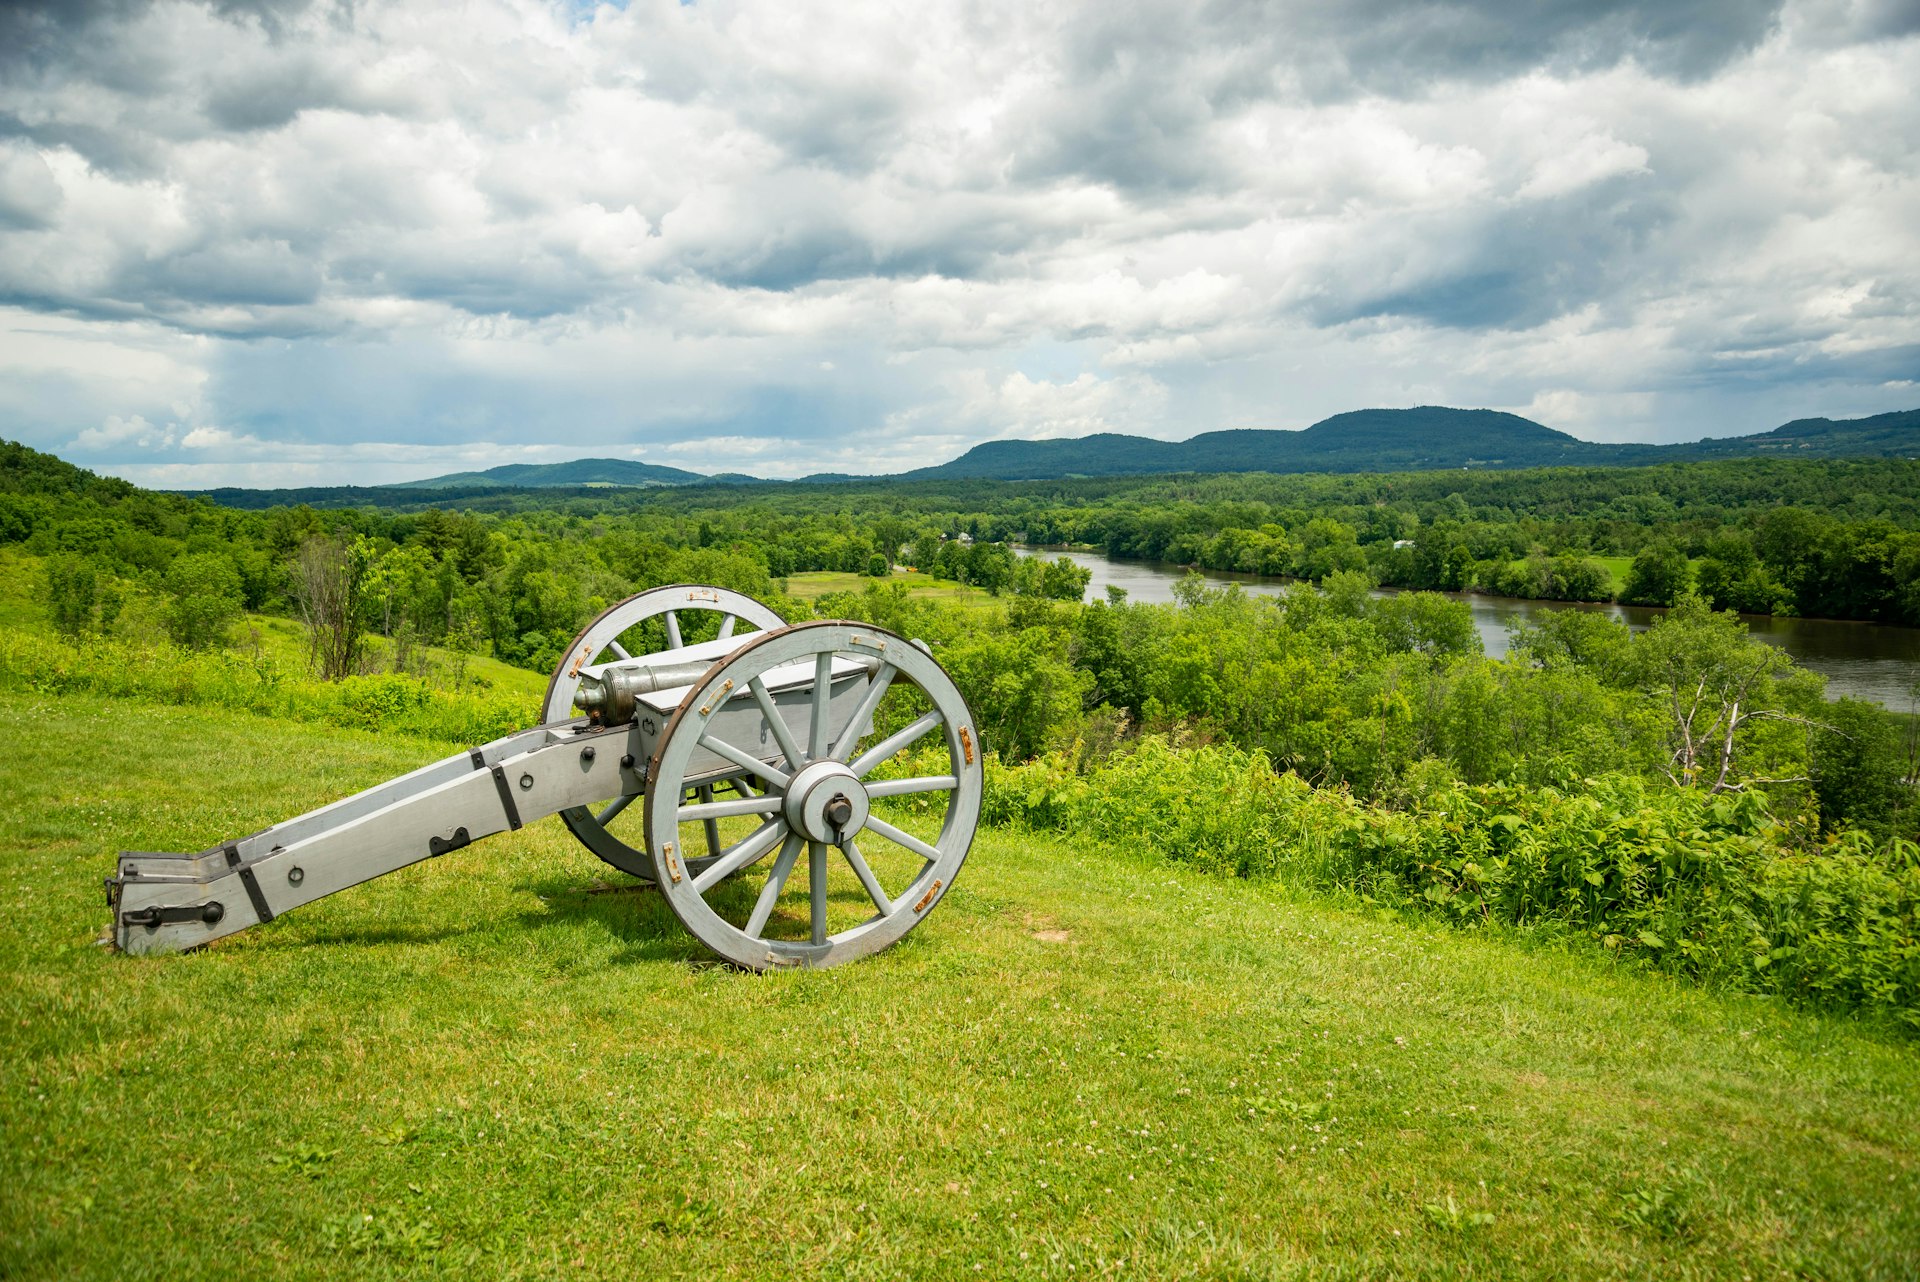 An old war cannon remains at Saratoga National Historical Park, Stillwater, New York